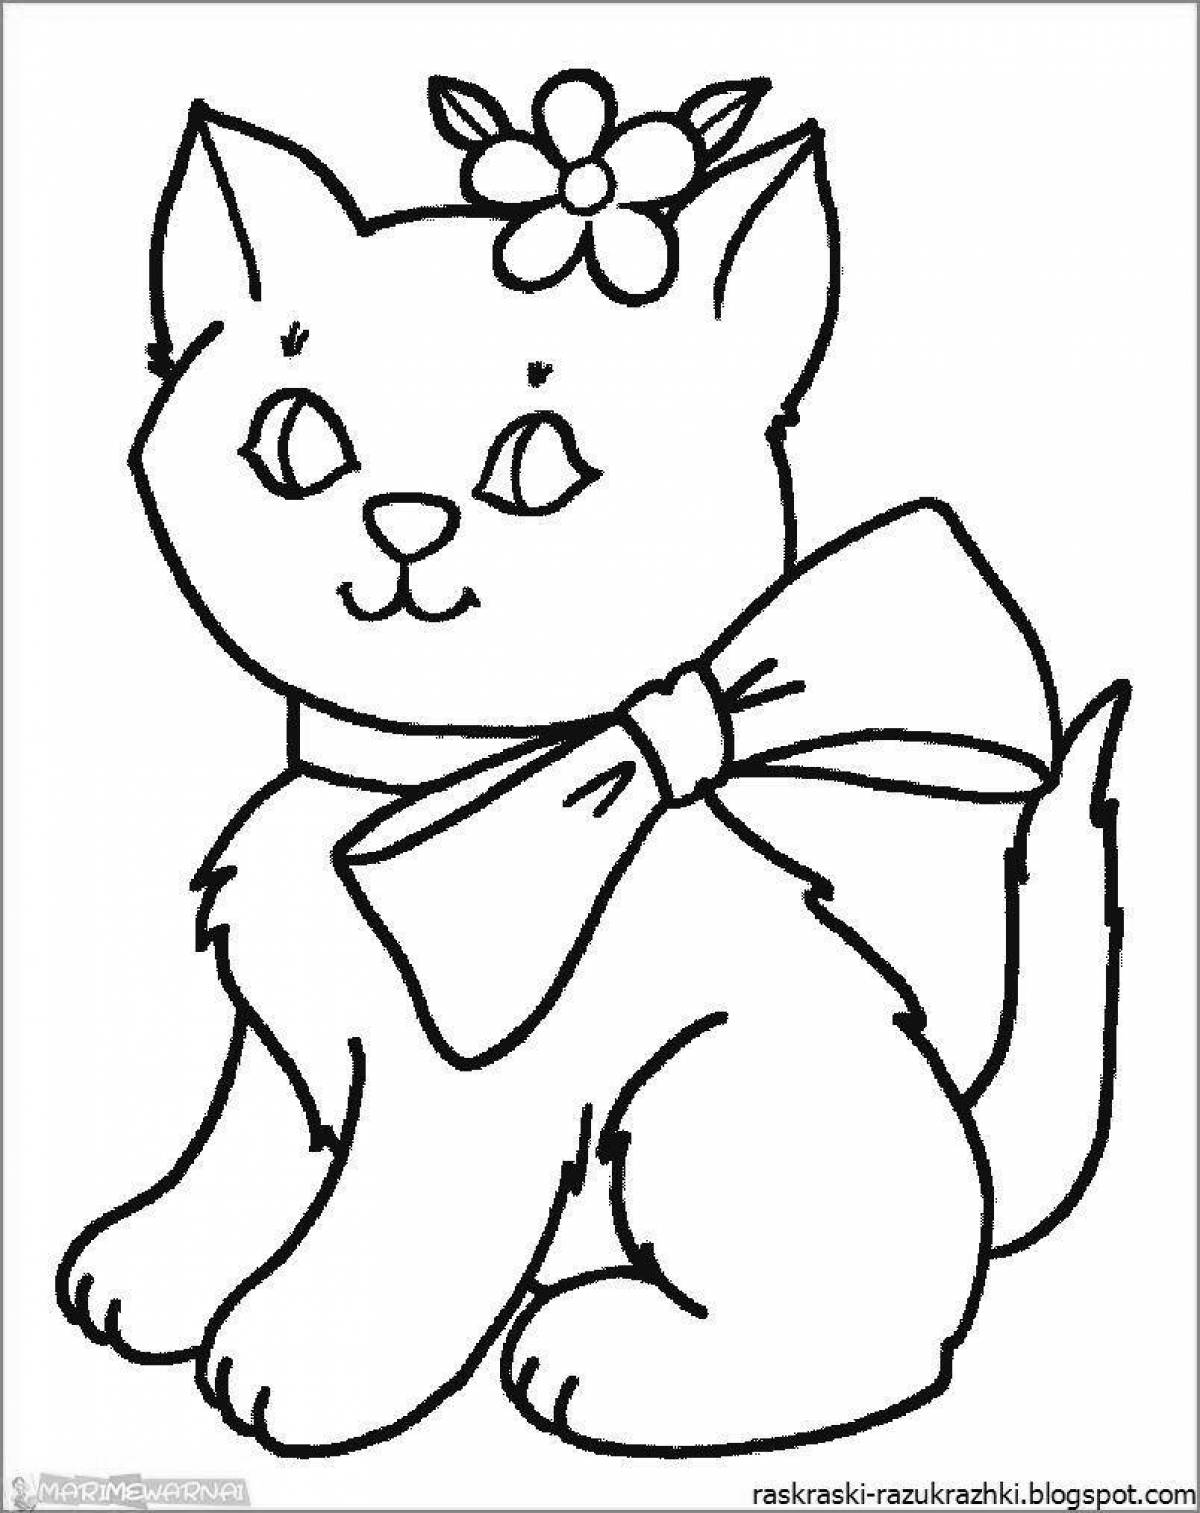 Great kitty coloring book for kids 4-5 years old